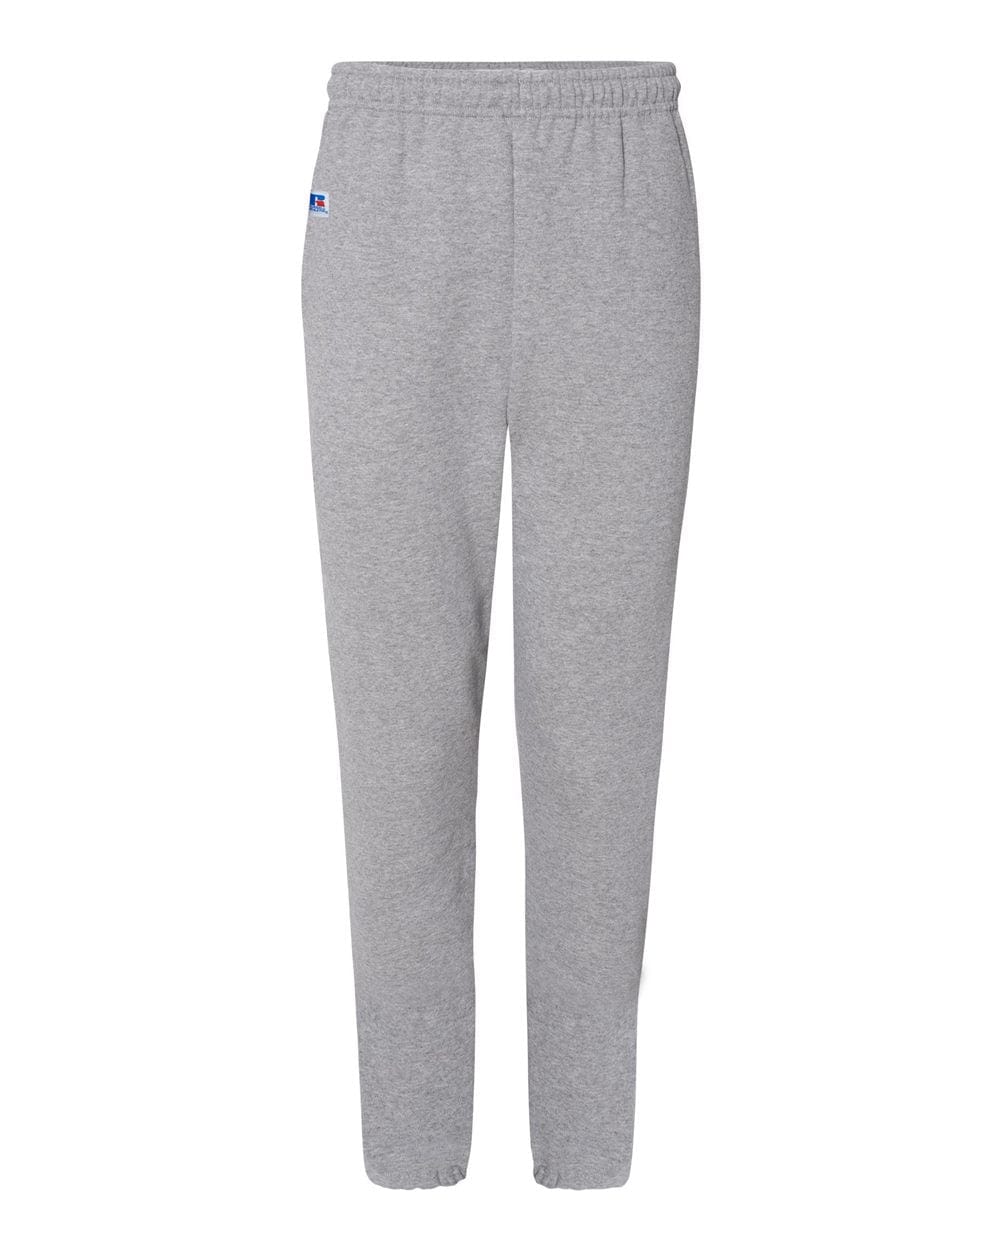 Russell Athletic - Men's Dri Power® Closed Bottom Sweatpants with